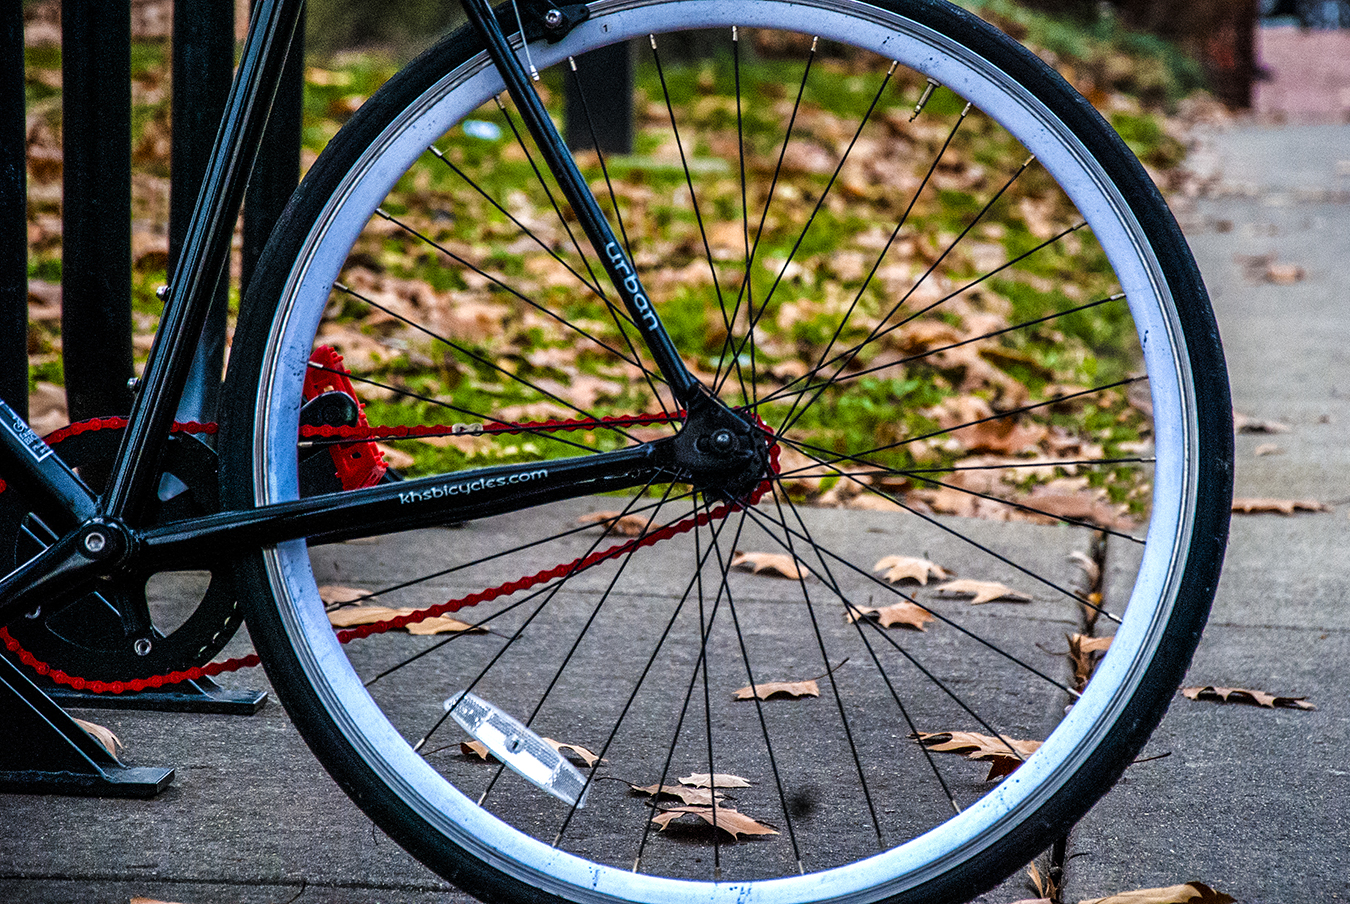 Victoria_Meng_Bike_Wheel_Divide_Colorful_Fall_Leaves_Cicle_Philly_Scenery_Geometric_Photo